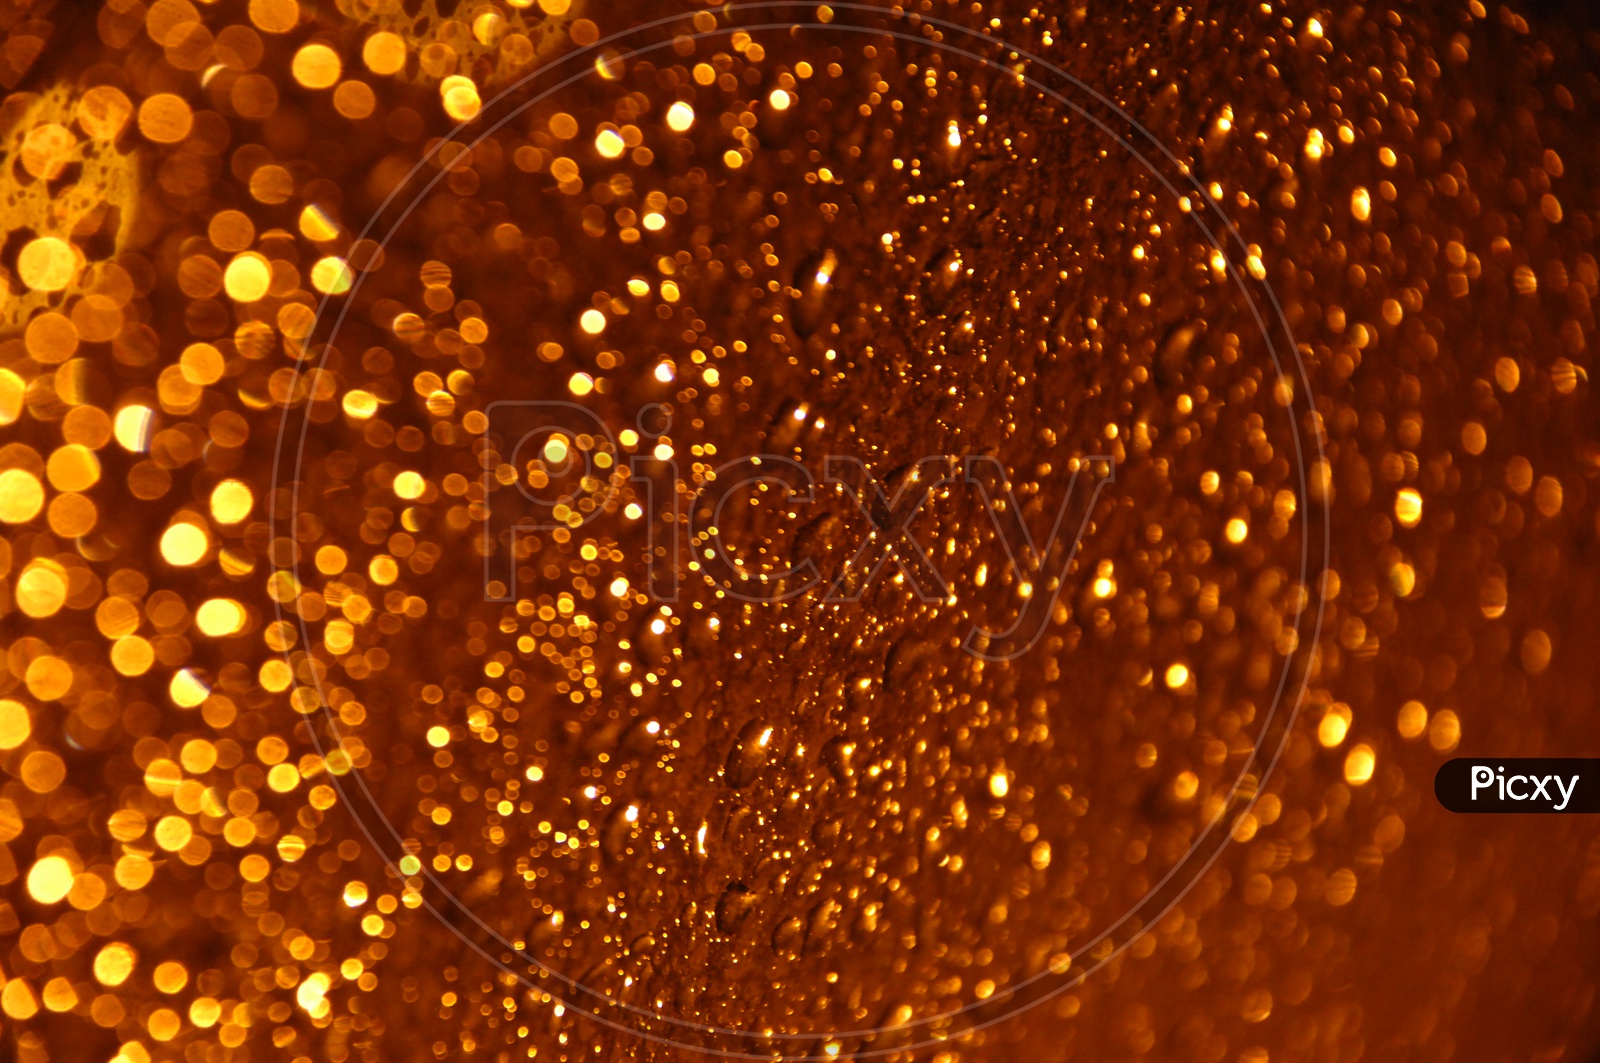 Water droplets golden yellow abstract background